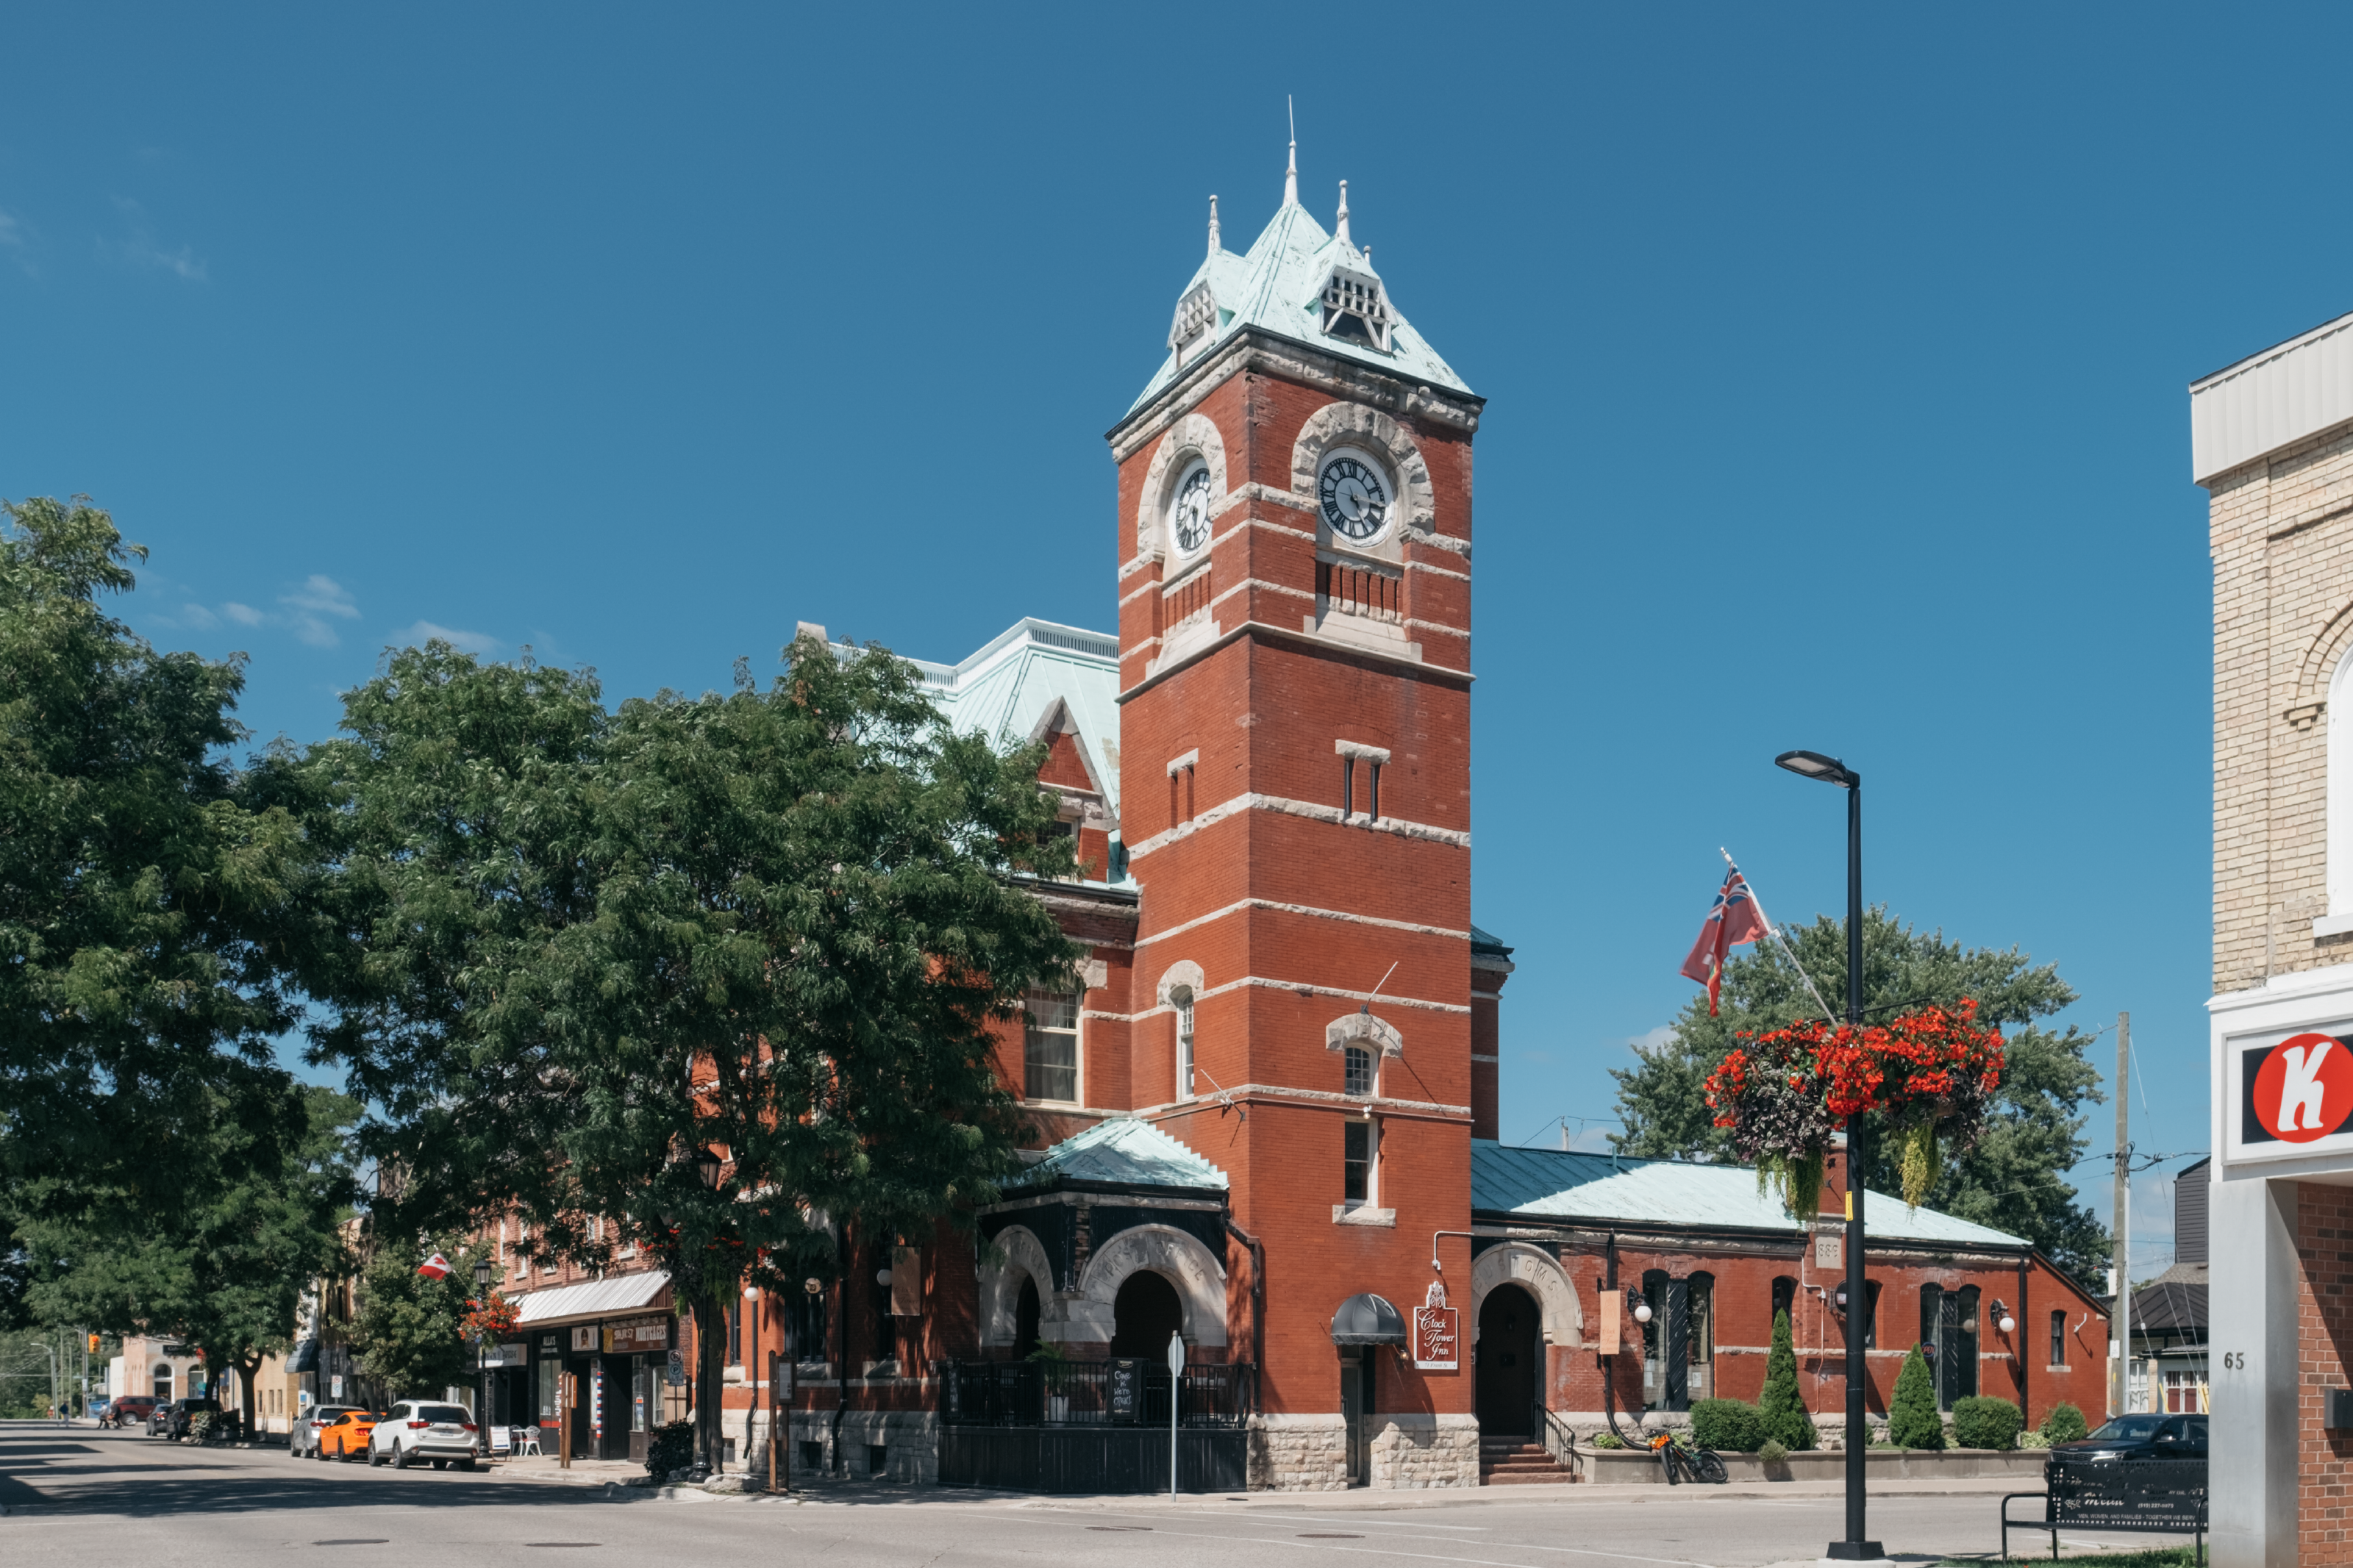 Tall, red brick clock tower on the corner of an intersection, adjoined by a one-storey brick building on the right and a three-storey brick building on the left. 